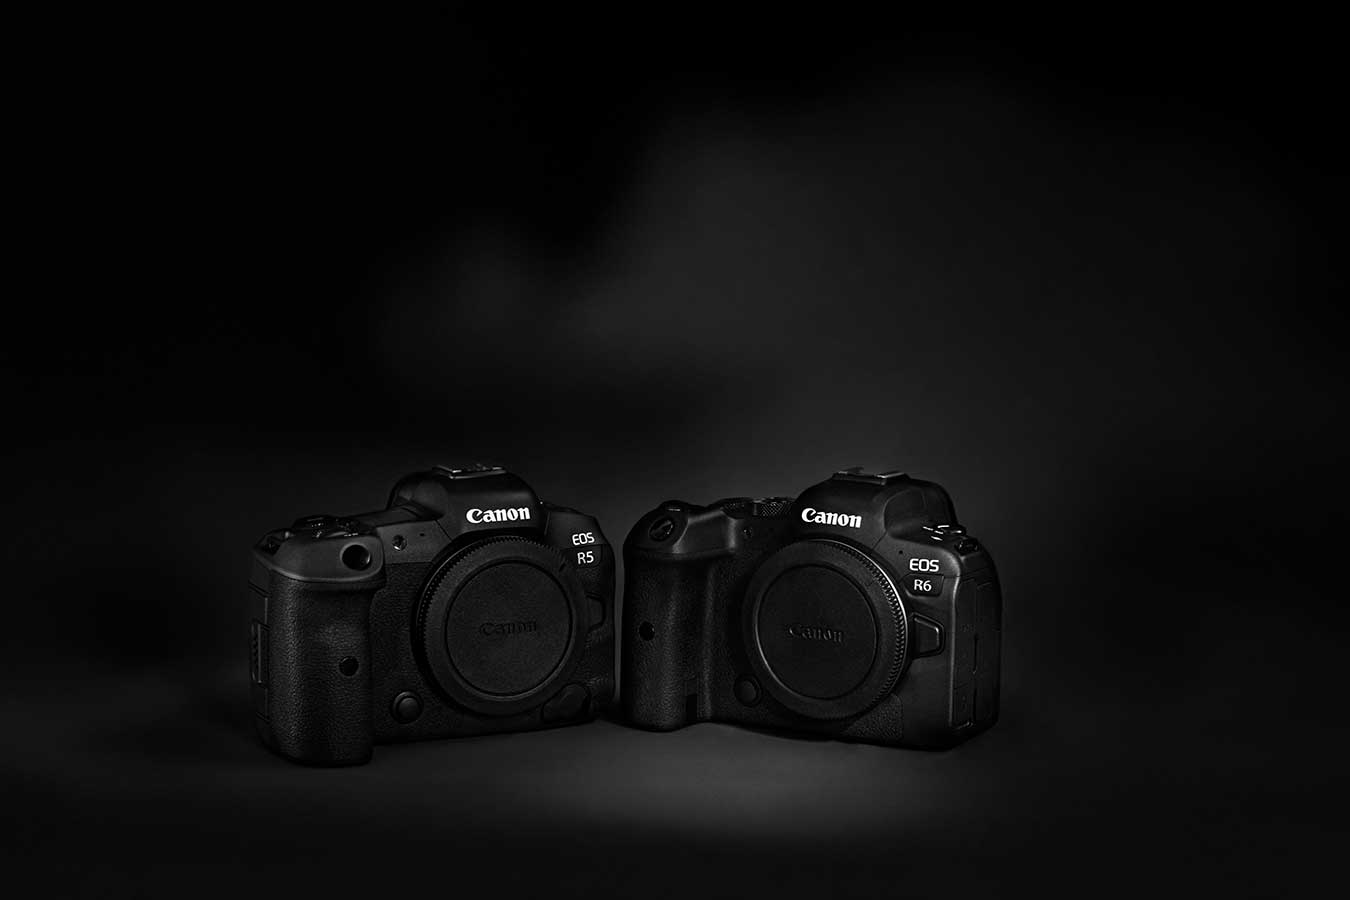 the-canon-eos-r5-and-eos-r6-bodies-in-black-and-white